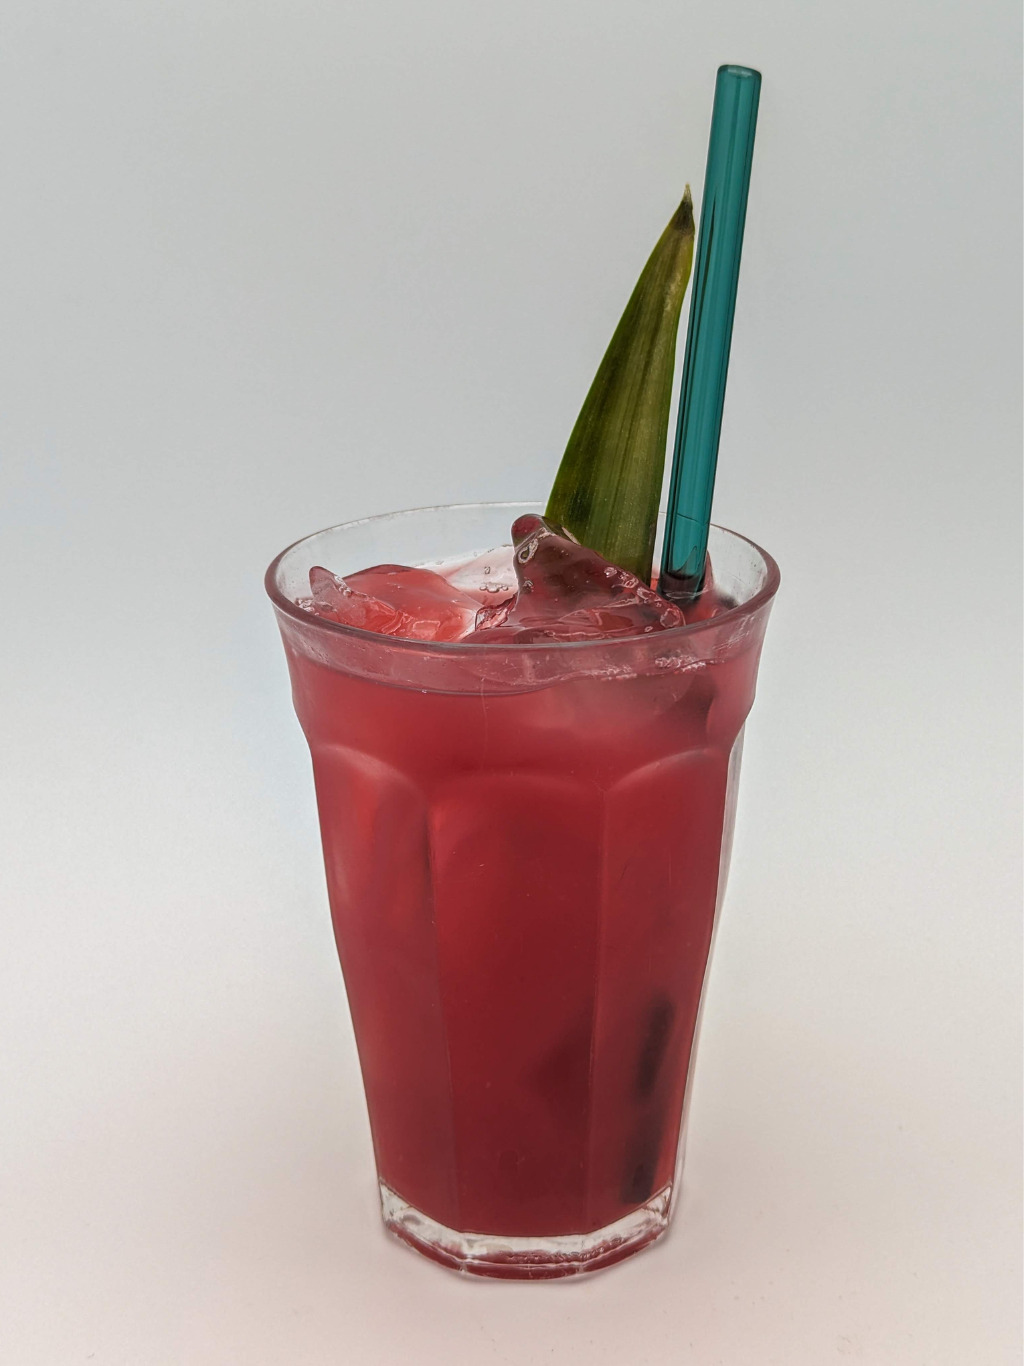 Ruby red colored liquid in a old fashioned glass with a green straw and a pineapple leaf garnish